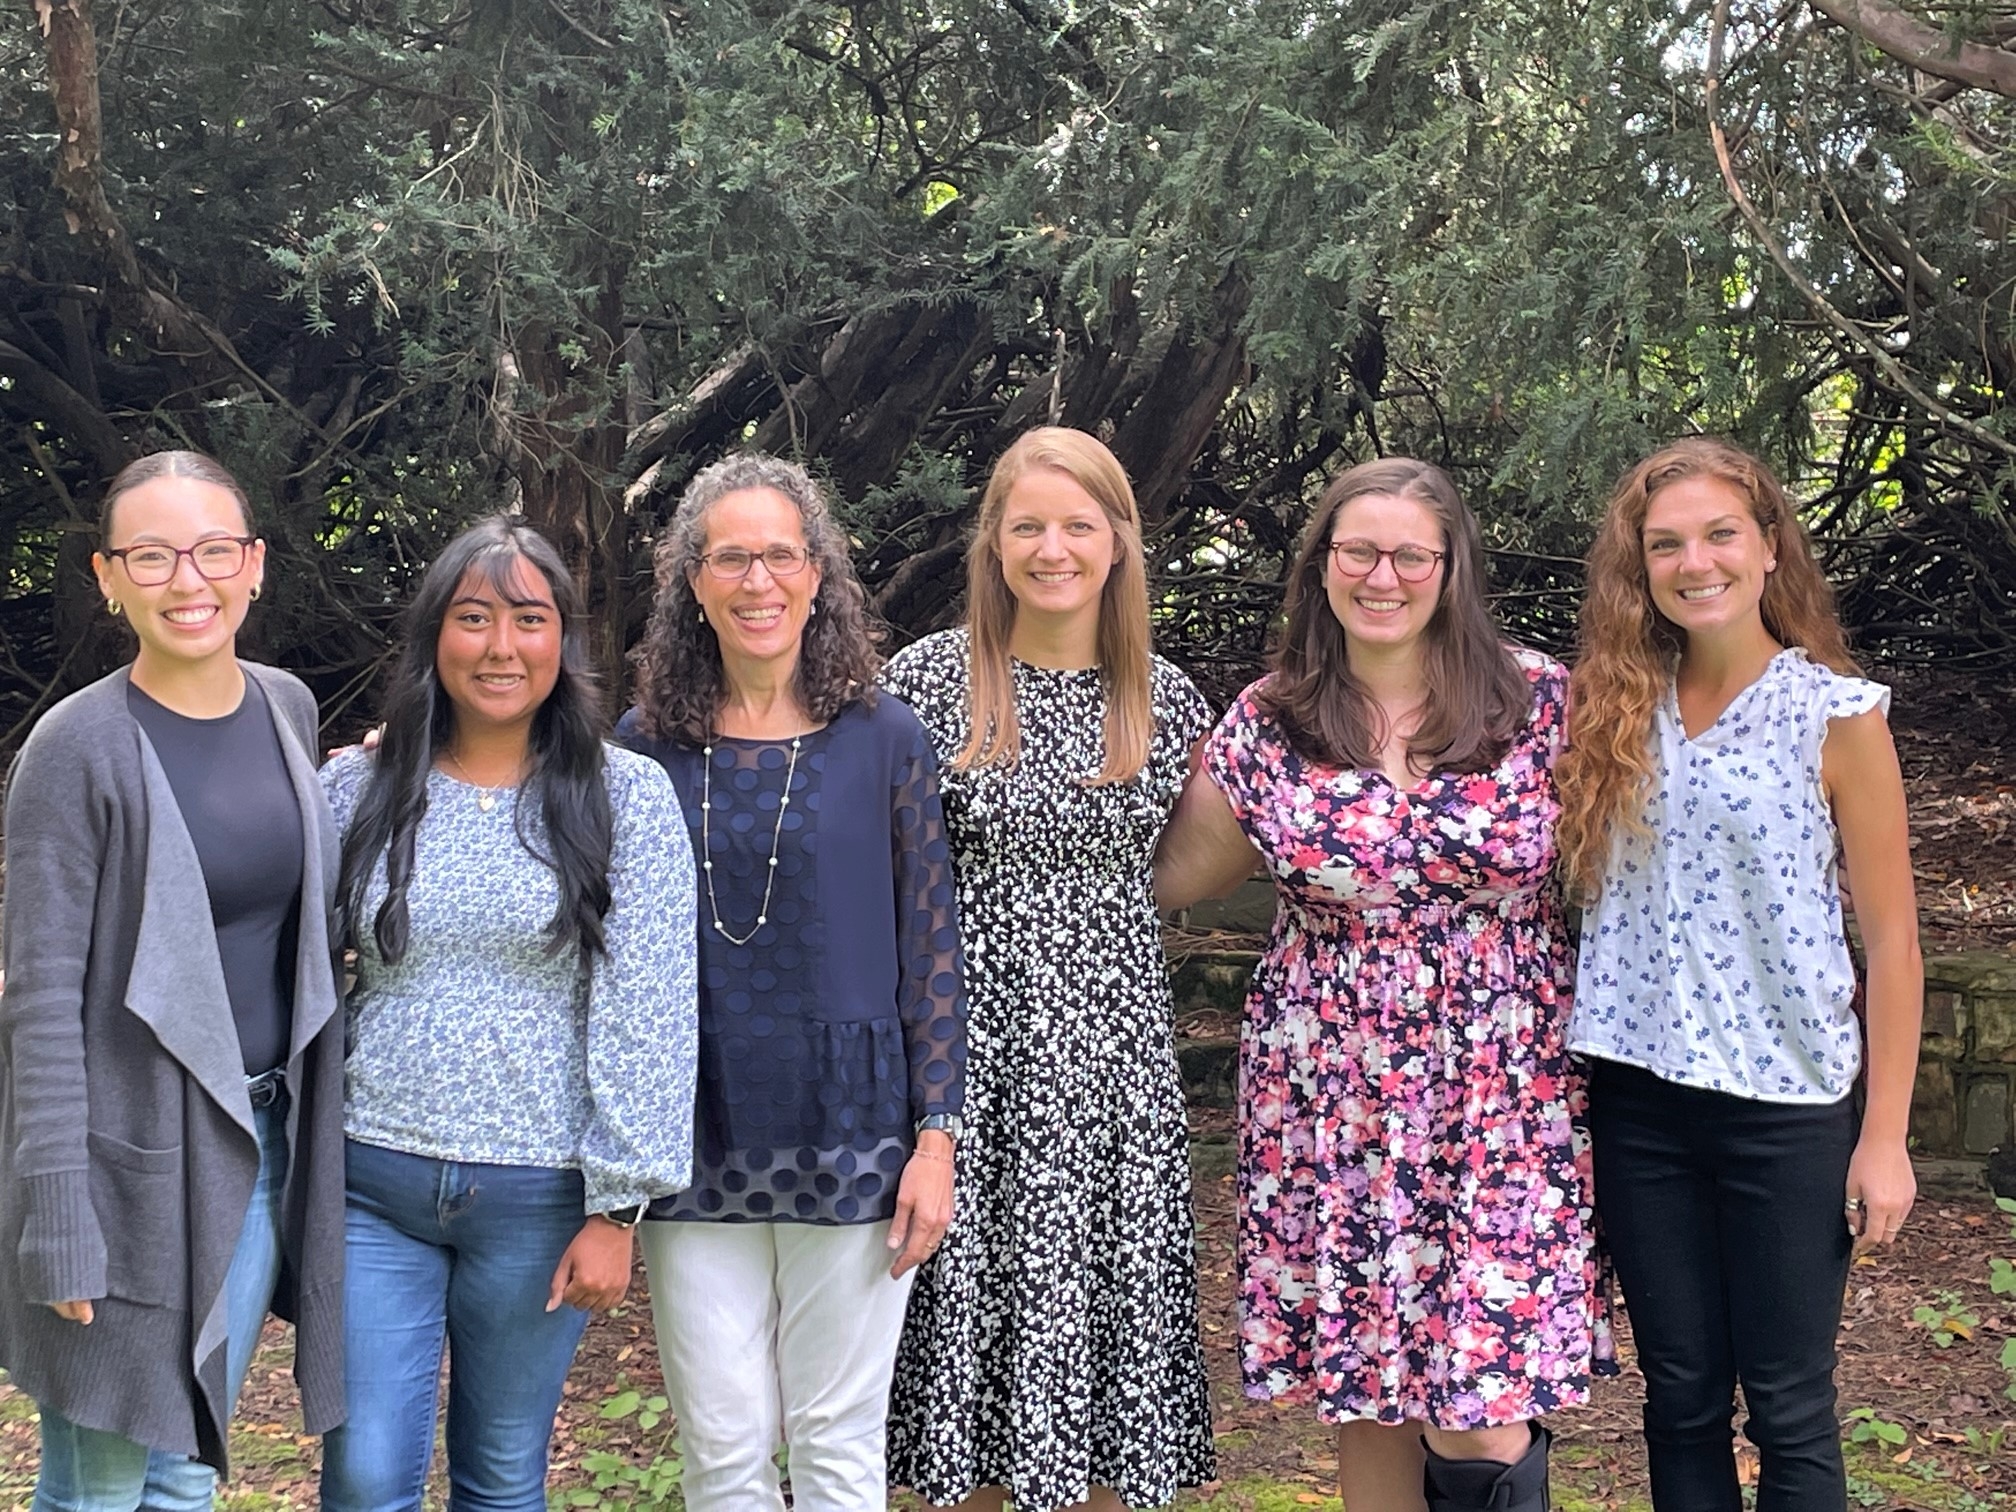 5 PANDA students and Dr. Scarpa lined up outside in September with a backdrop of trees